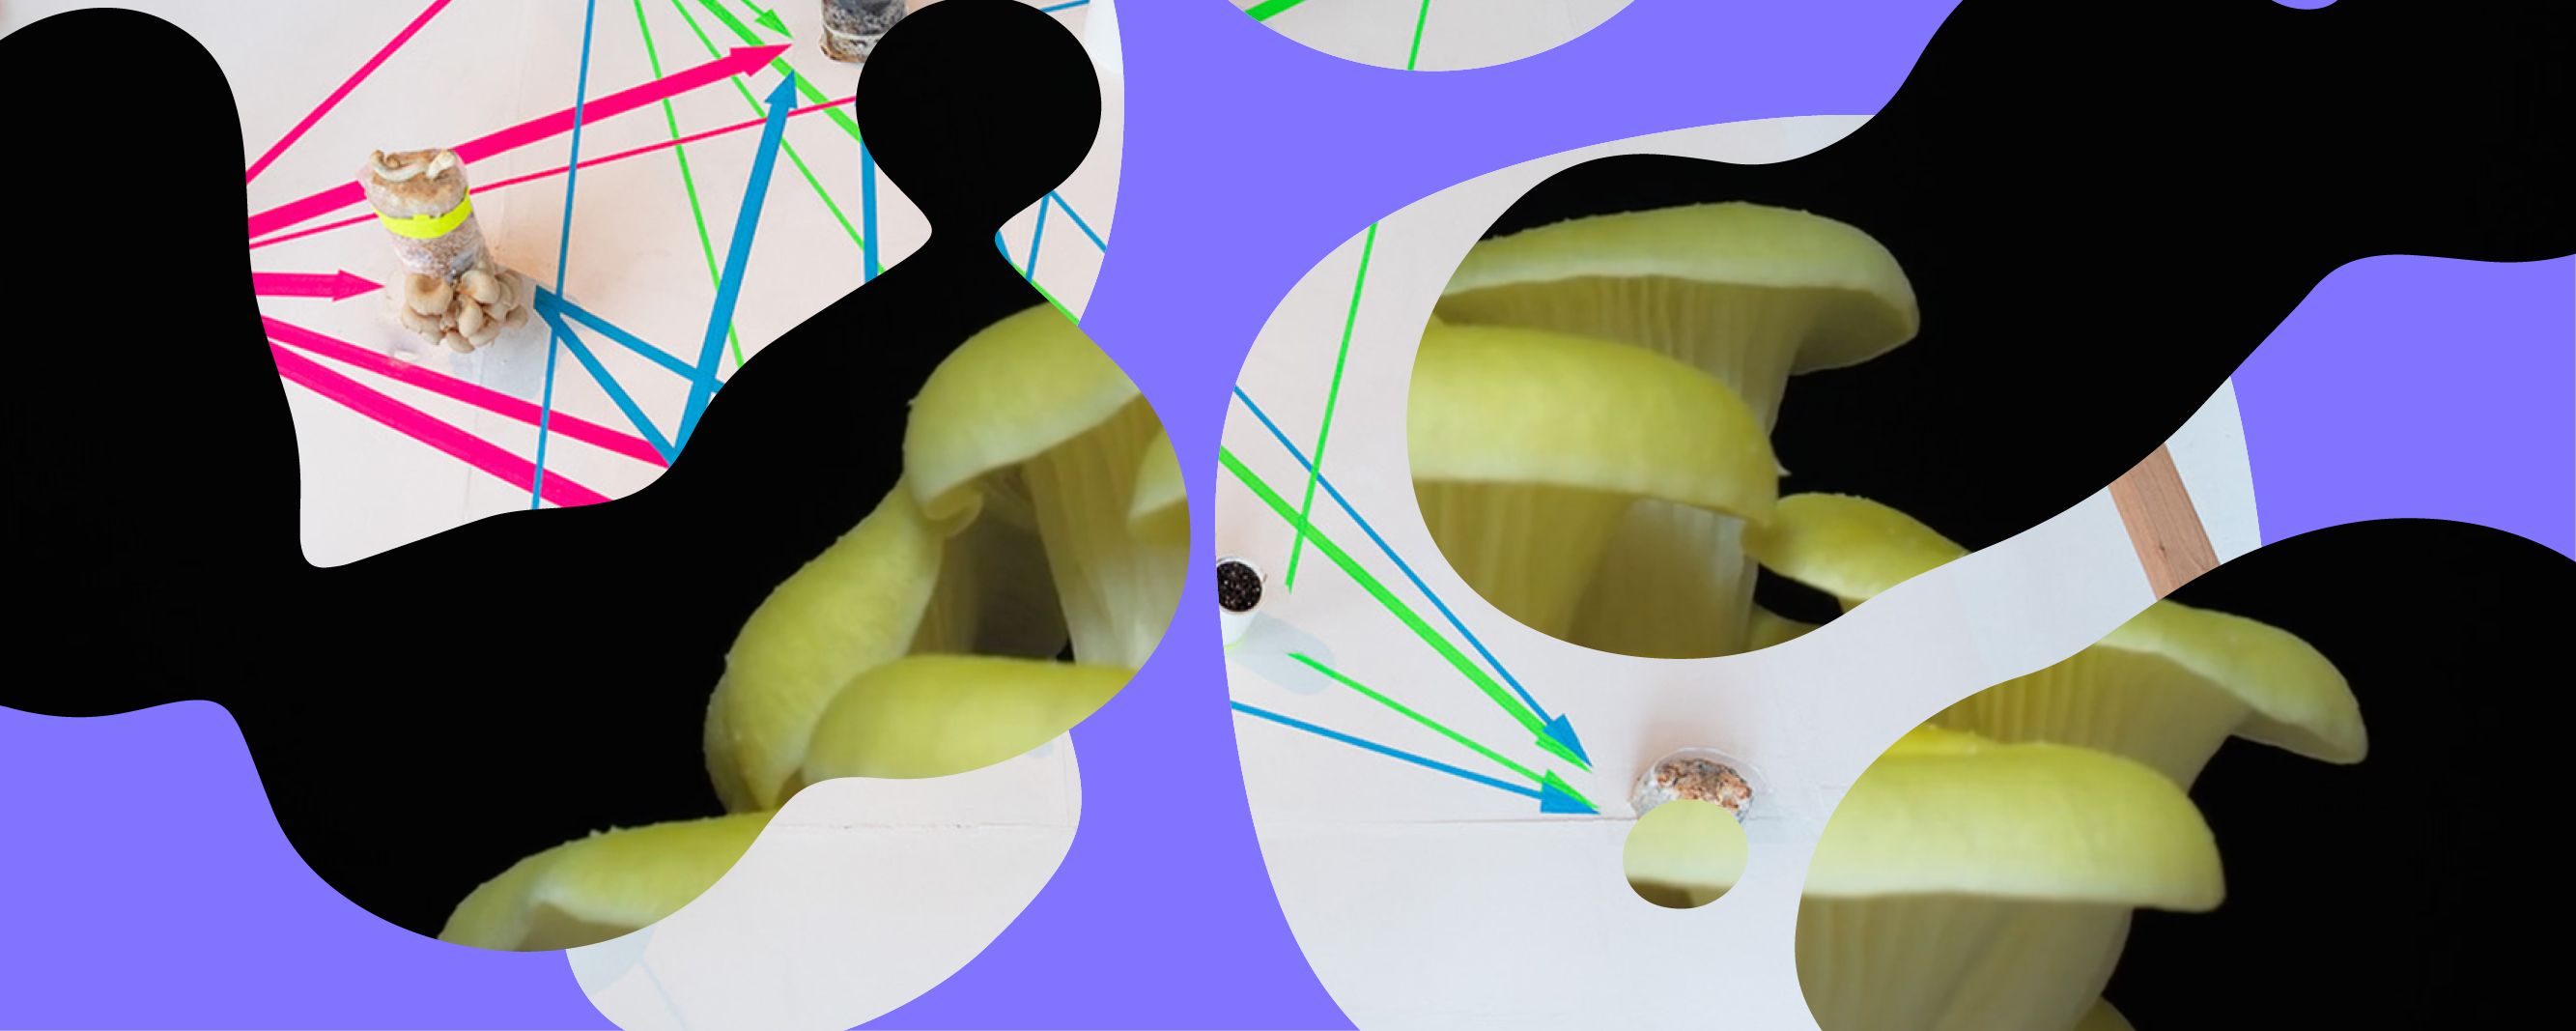 Coloured graphic collage of a diagram and photo of mushrooms